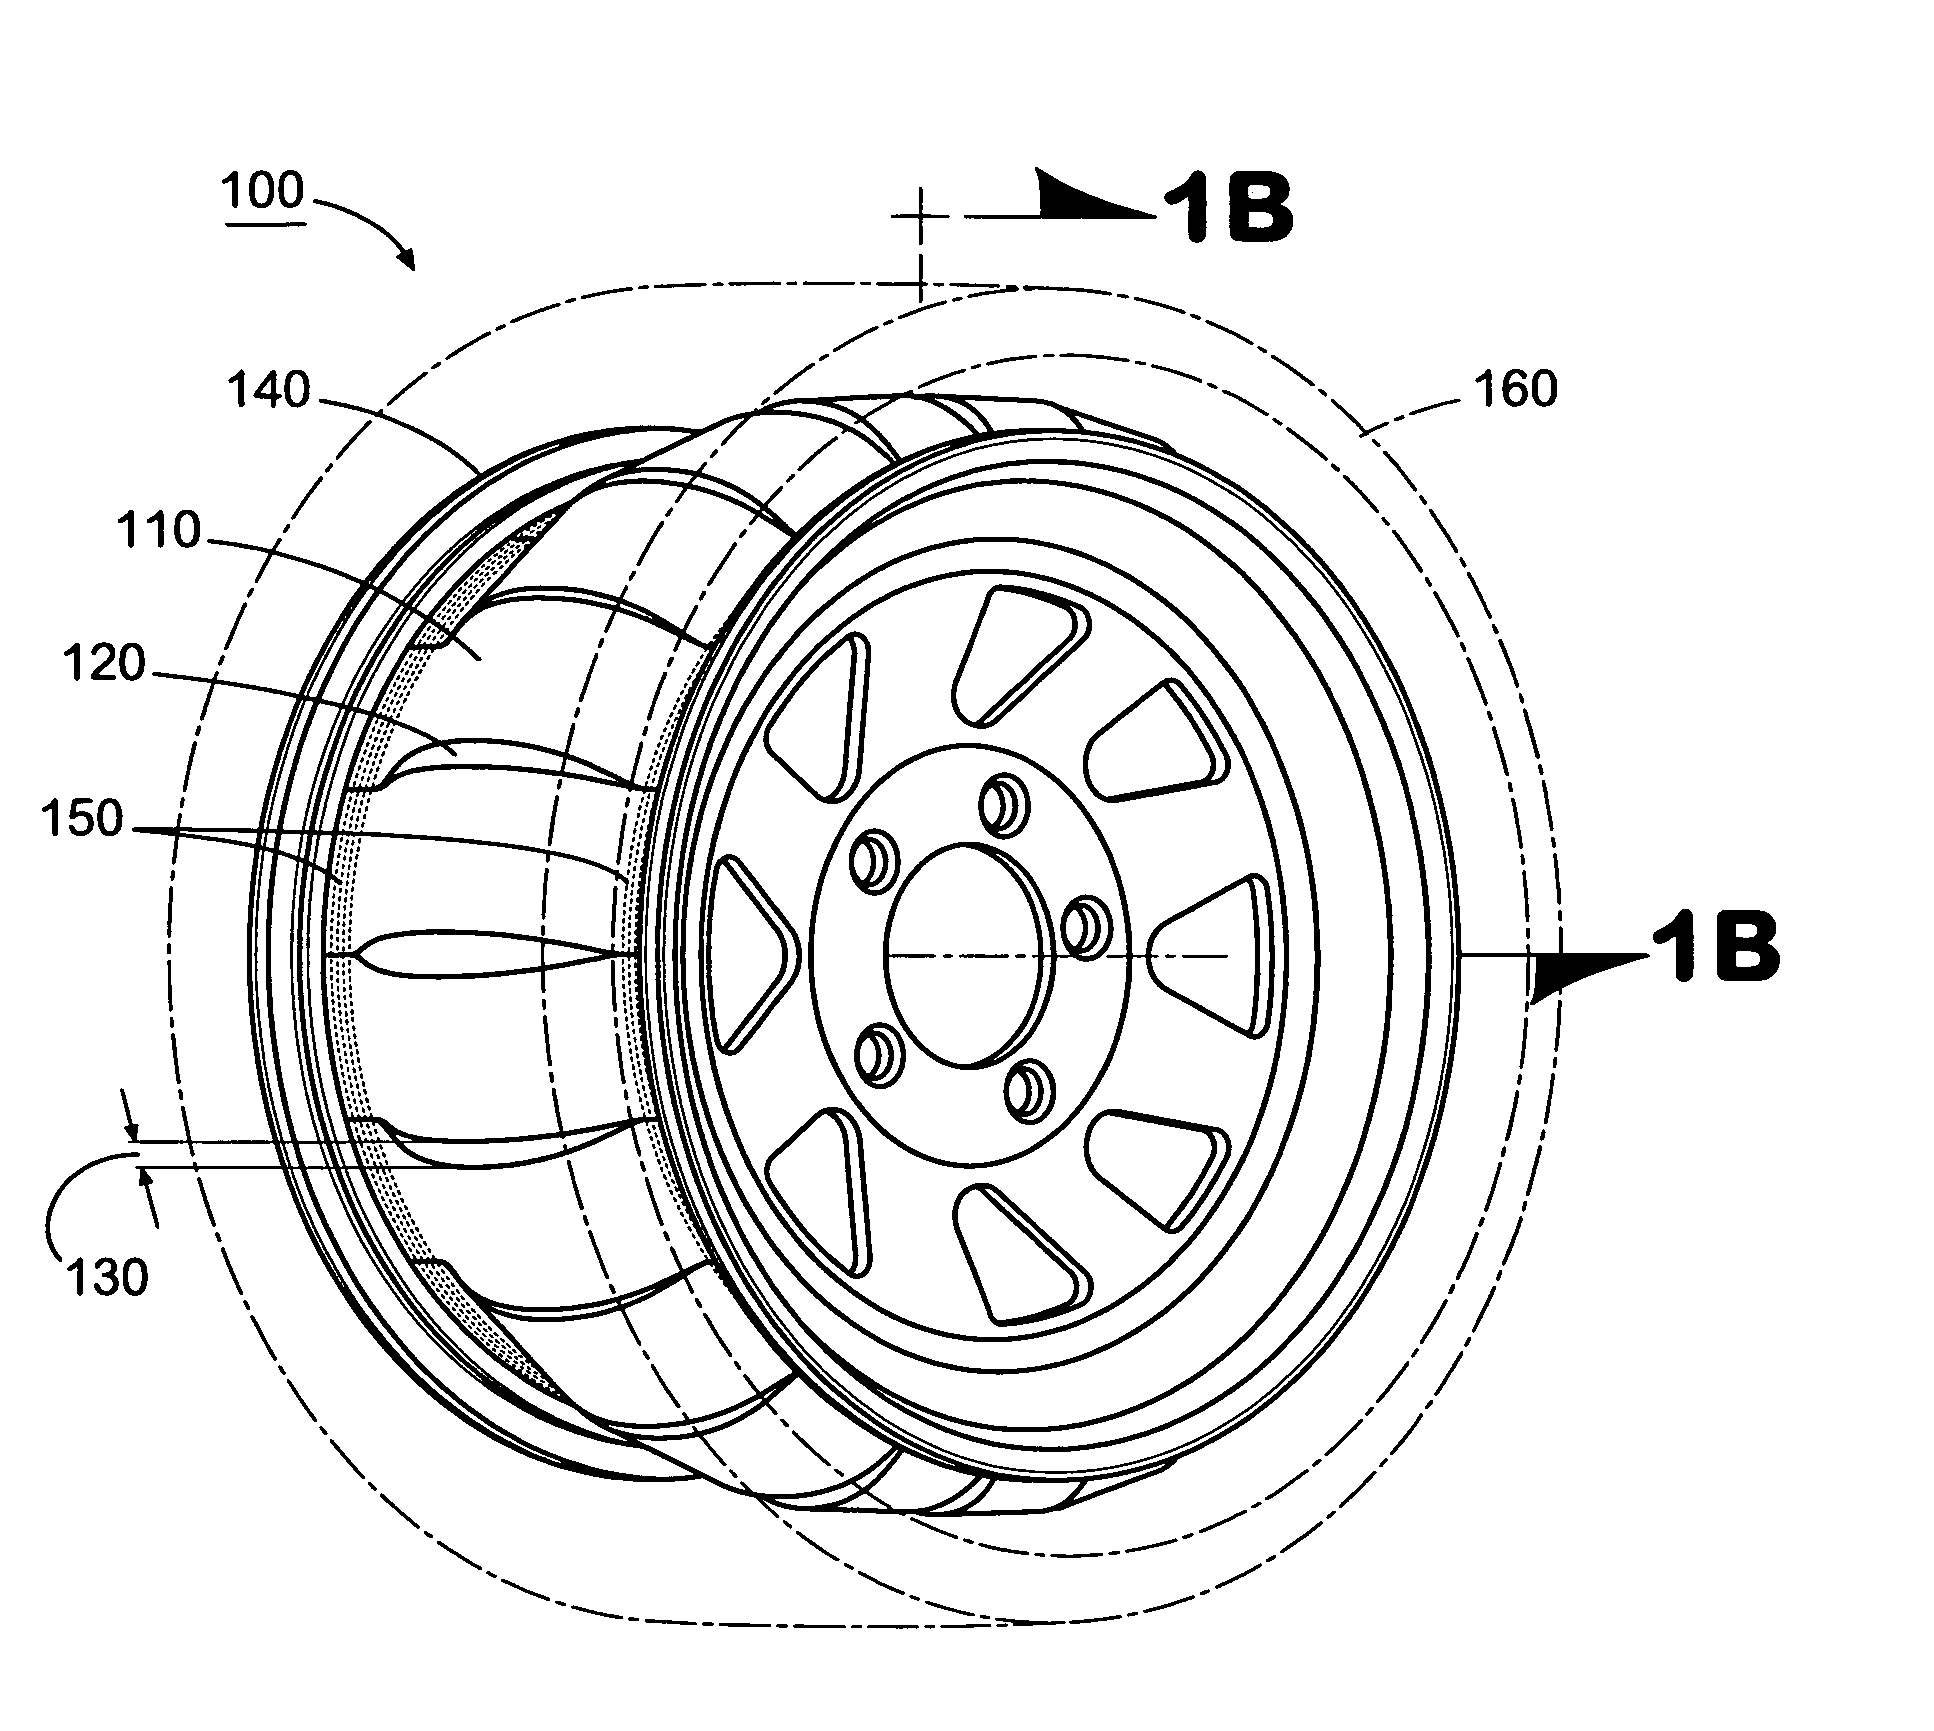 Tire and wheel noise reducing device and system